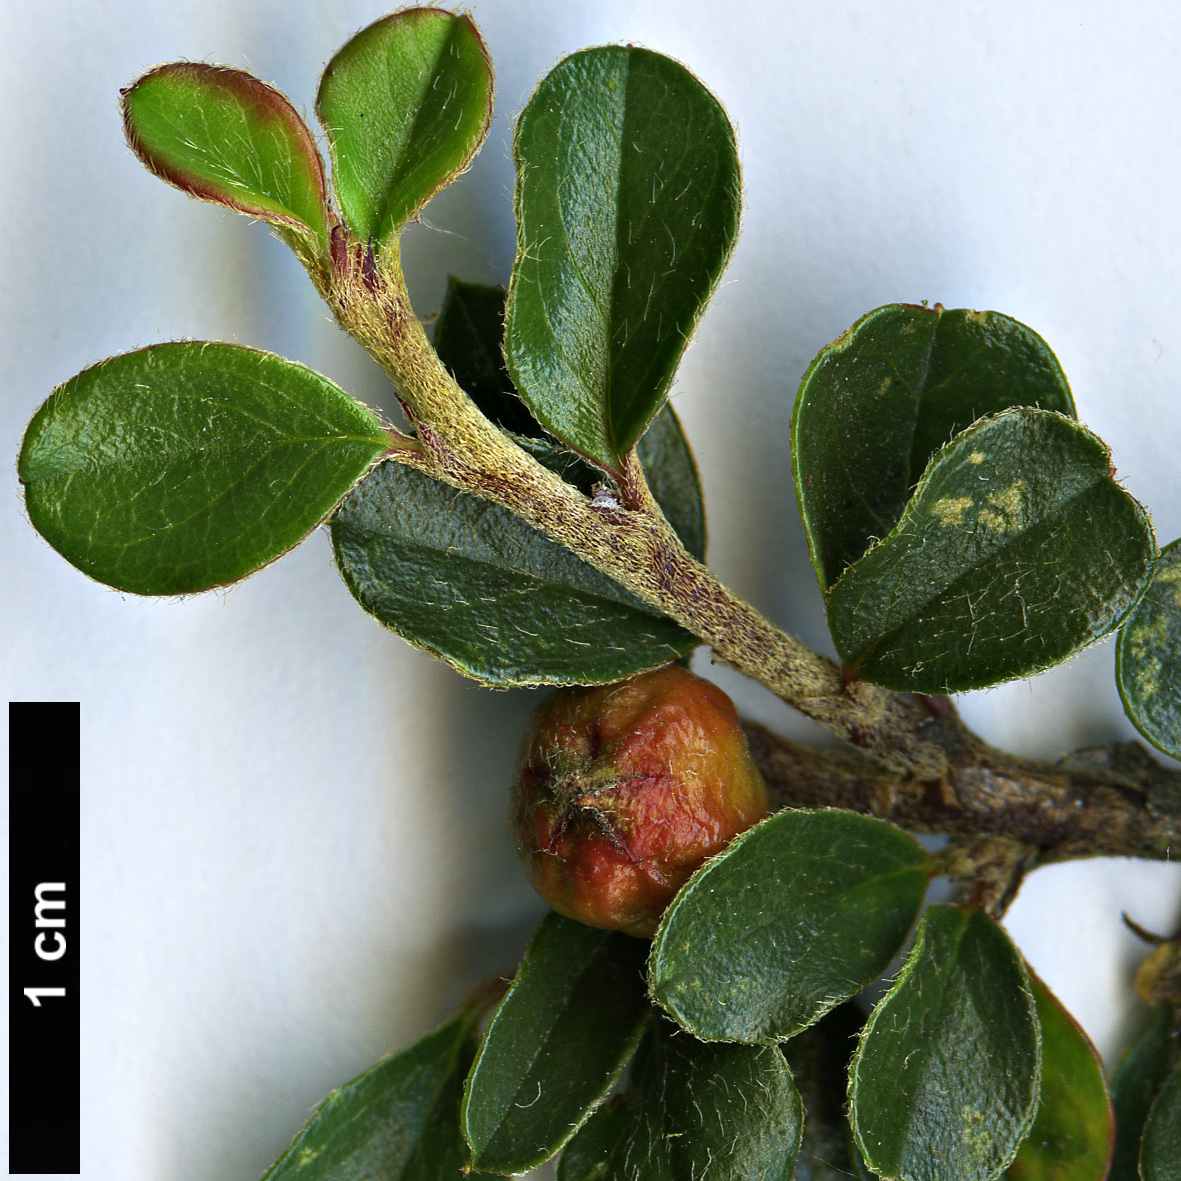 High resolution image: Family: Rosaceae - Genus: Cotoneaster - Taxon: atrovirens